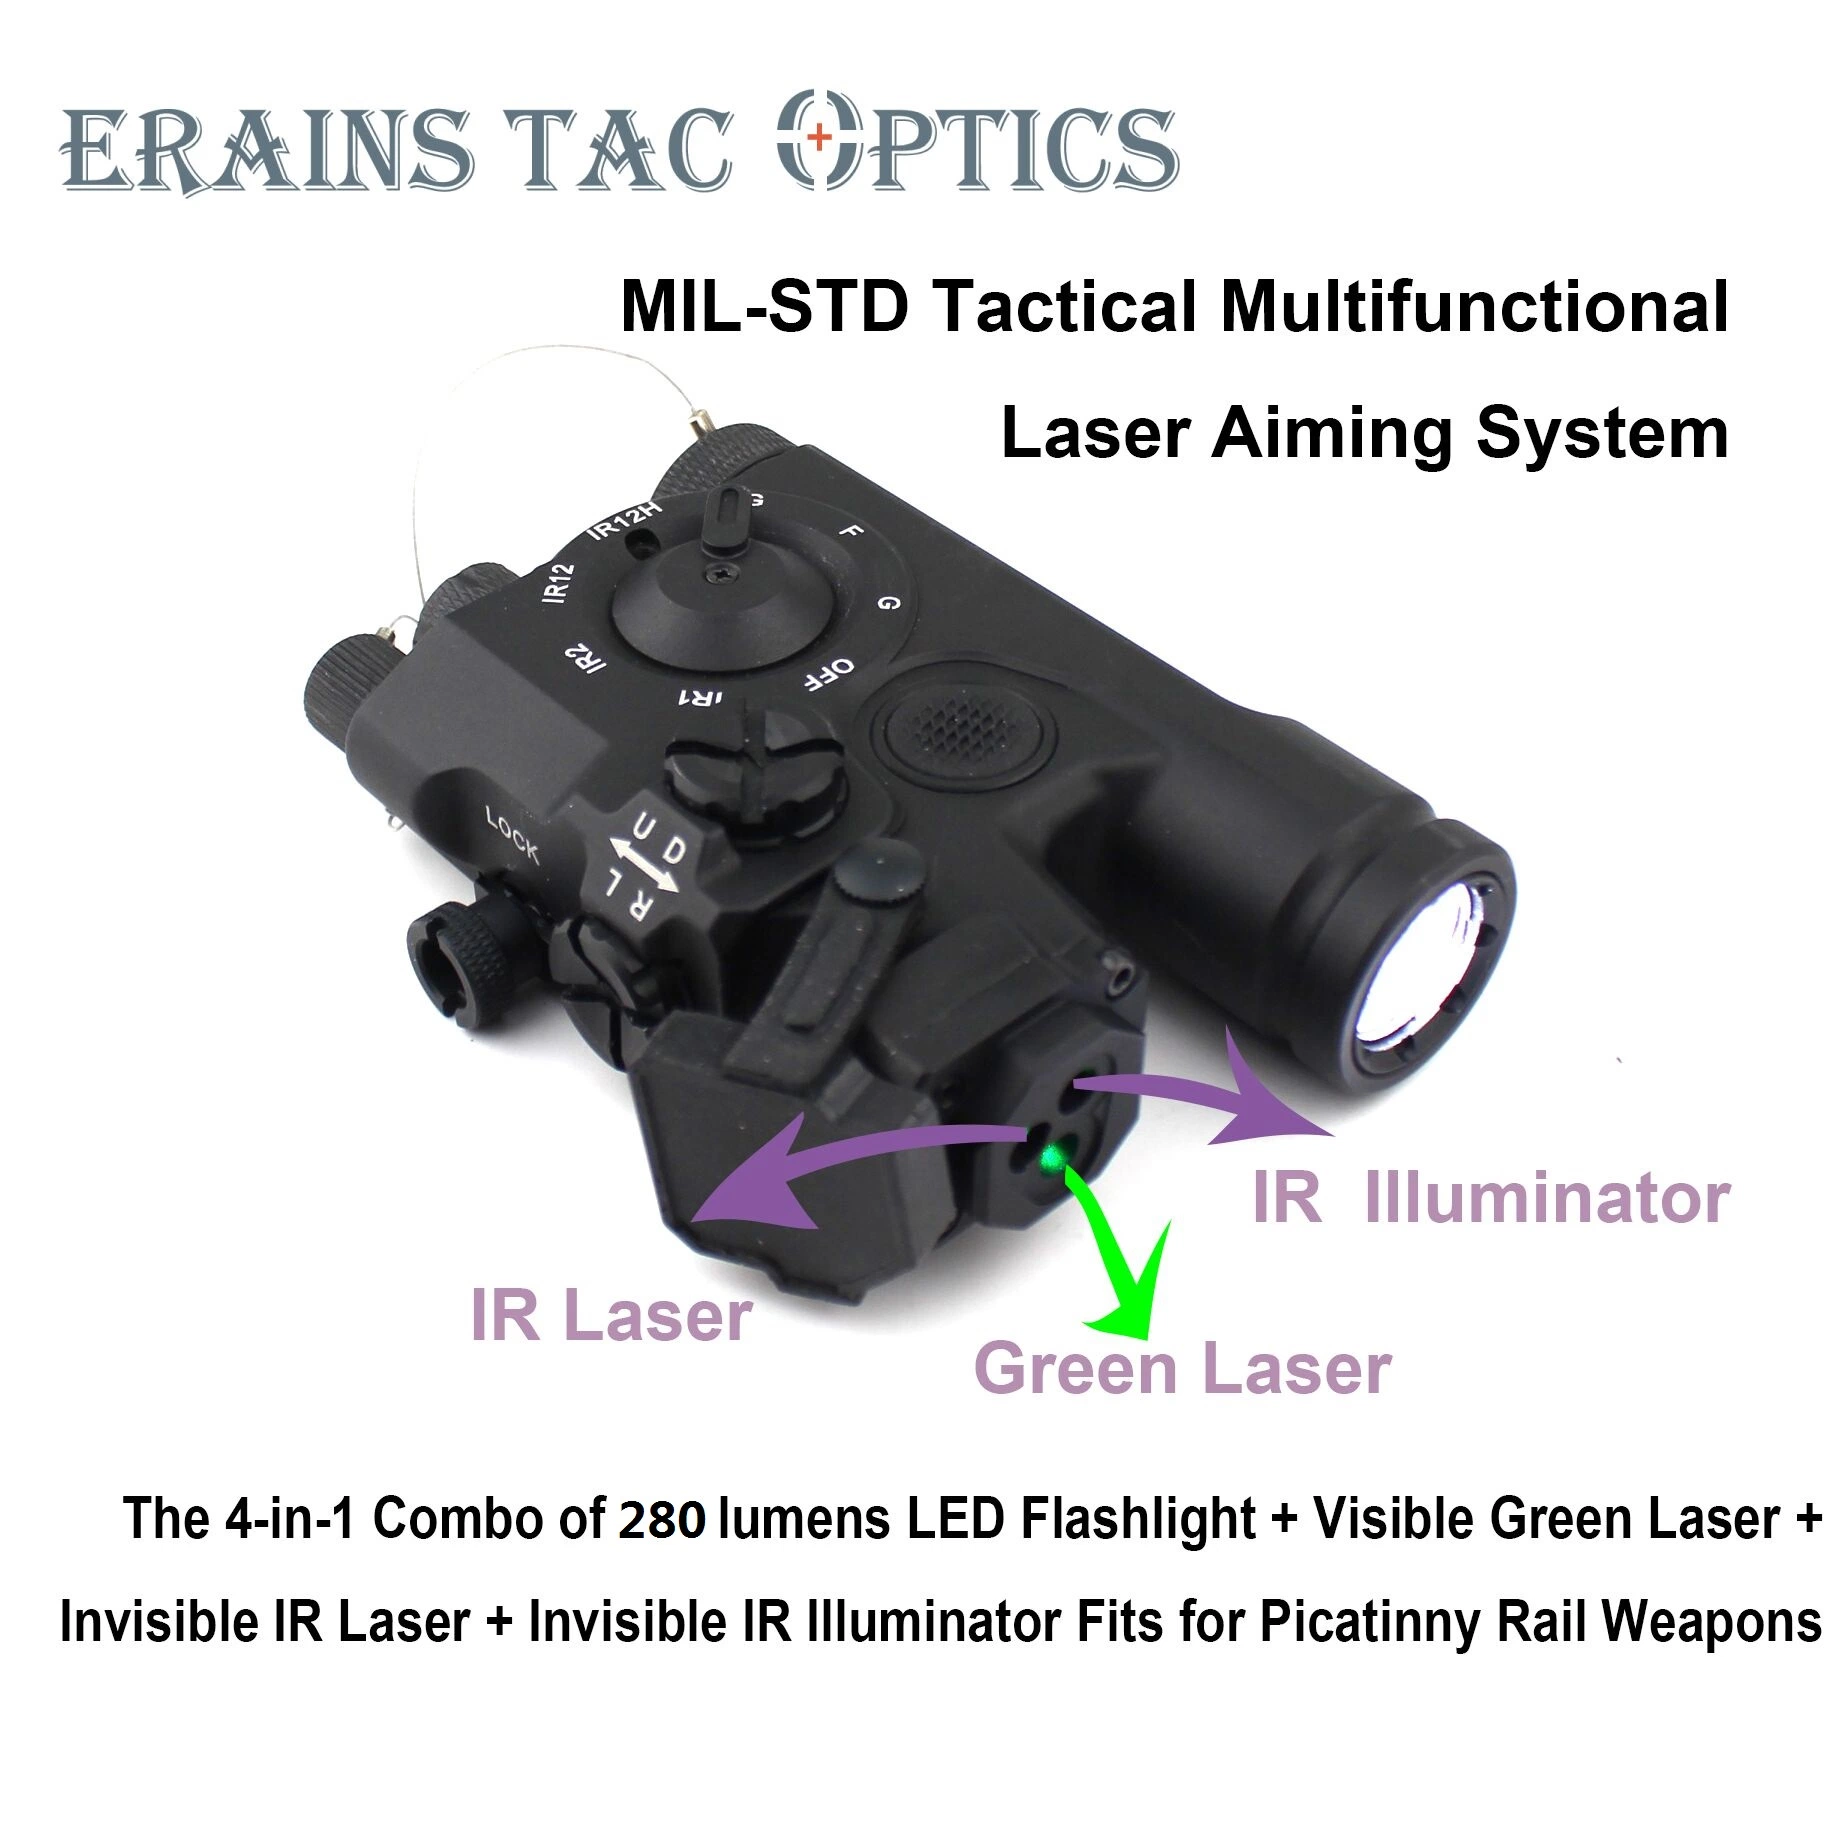 Un Pke Adopted Mil-Std 4 in 1 Laser Aiming Combo of Ipx8 Weapon Tactical 280 Lumens LED Flashlight IR Laser Illuminator Green Laser Collimator Sight